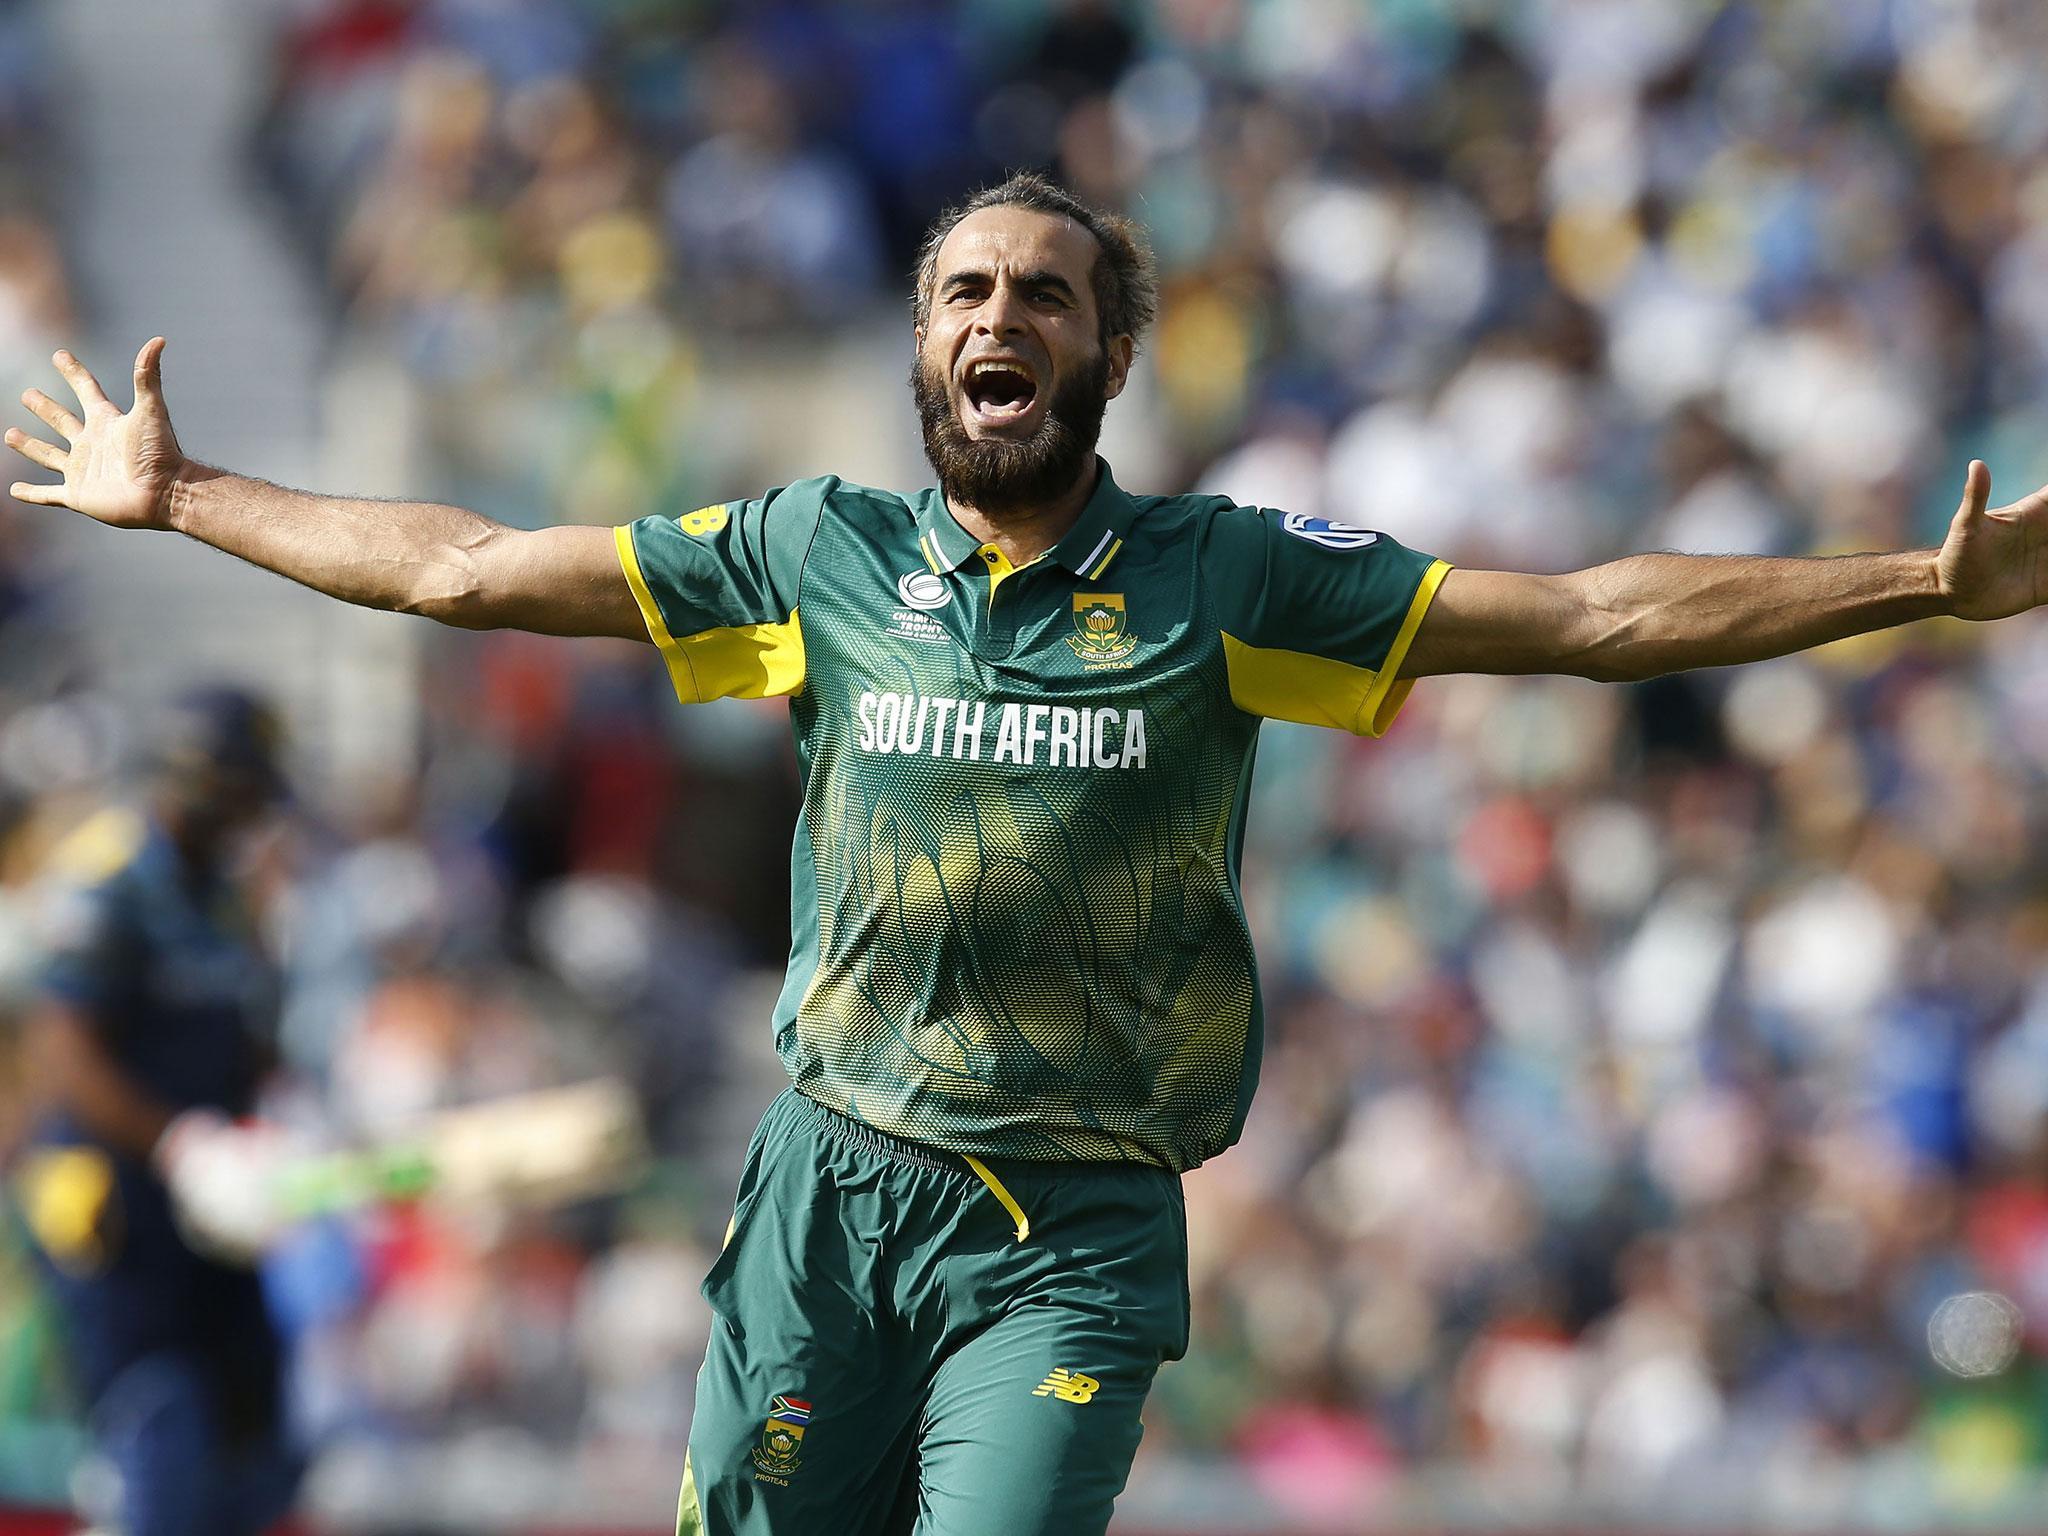 Imran Tahir spun South Africa to victory to give them the perfect start to the tournament